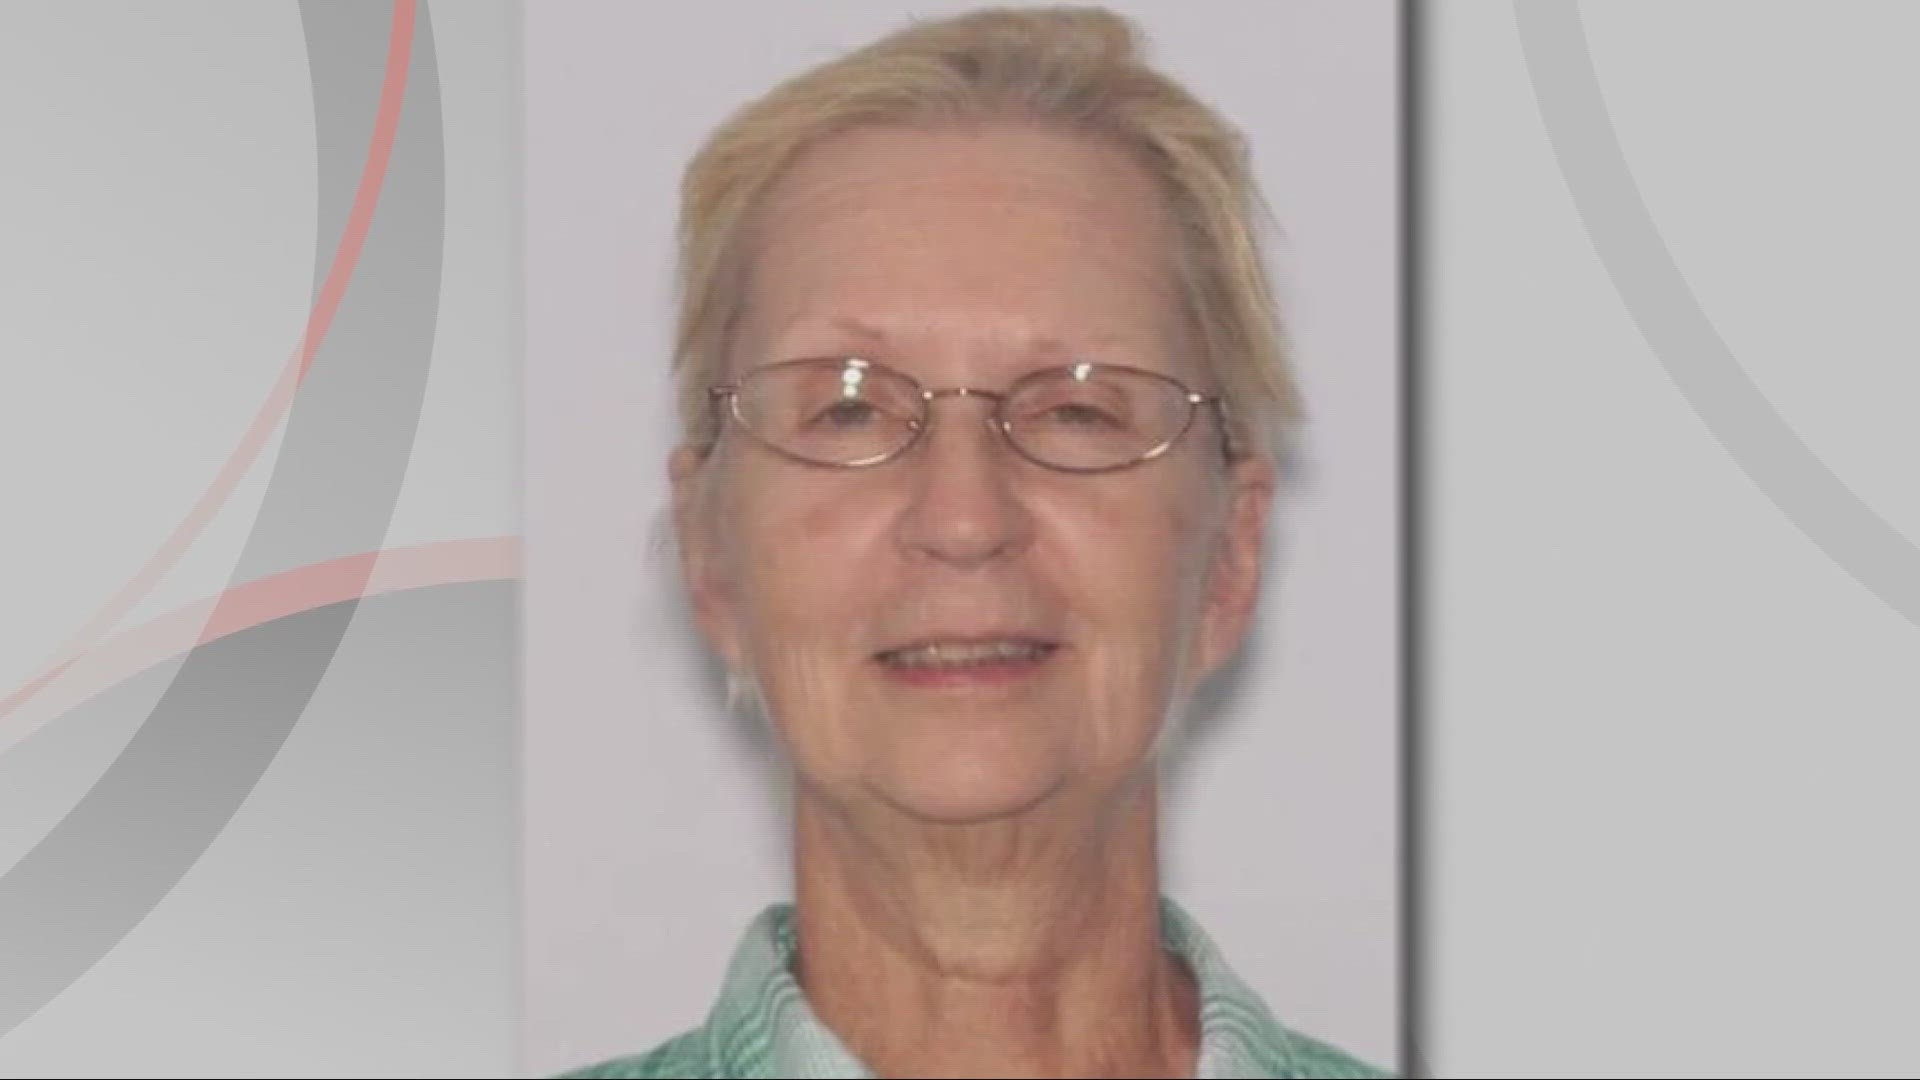 Susan Taylor is believed to have gone missing from her Sidley Road residence on Friday morning.